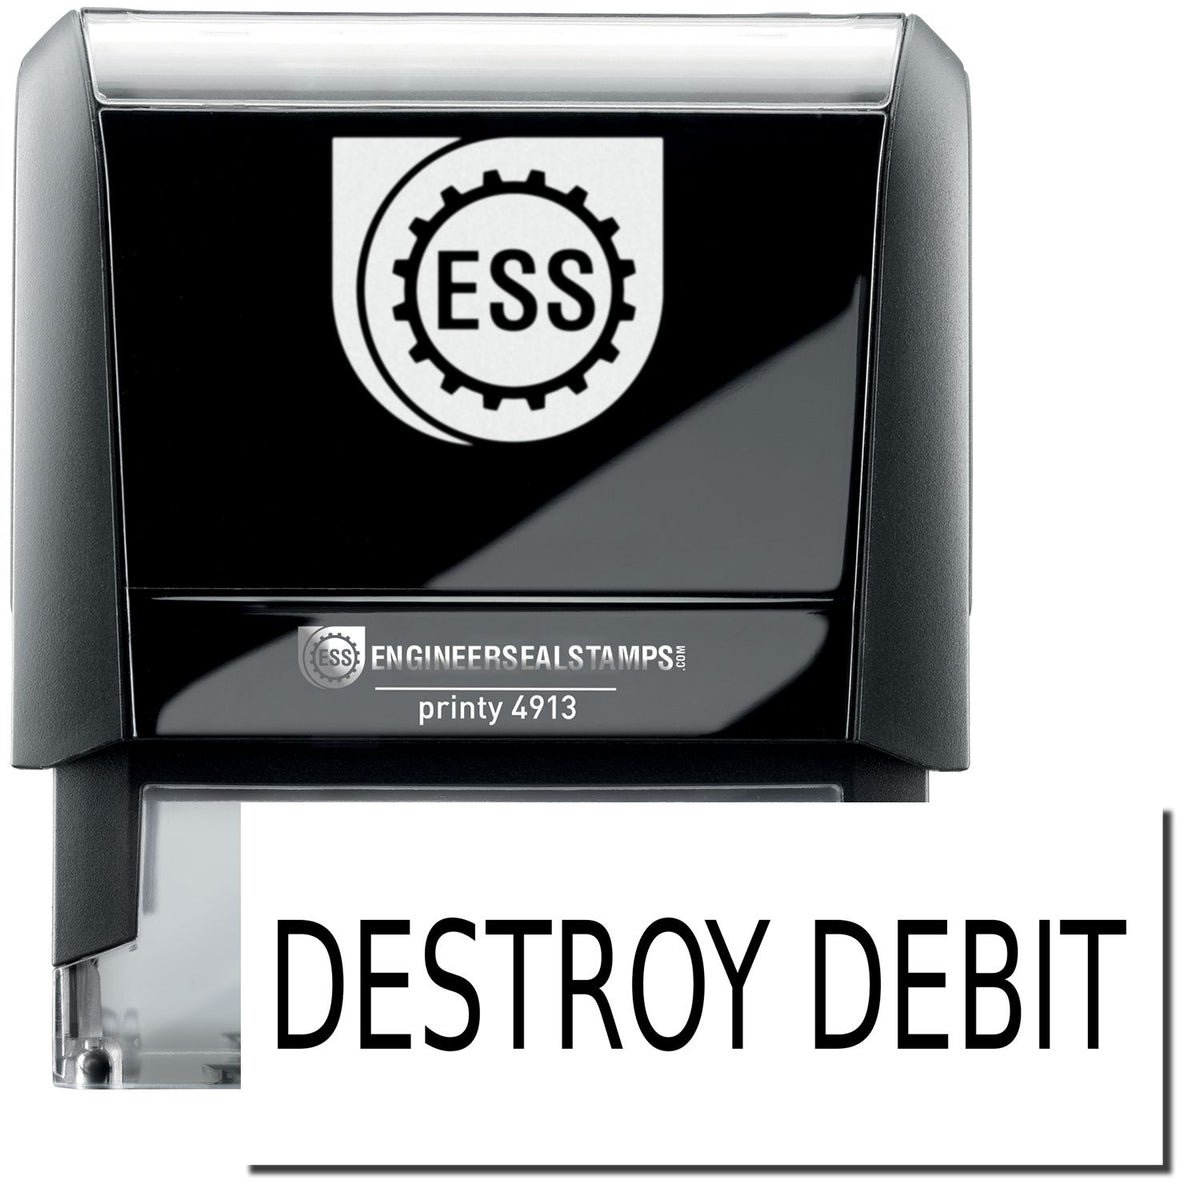 A self-inking stamp with a stamped image showing how the text &quot;DESTROY DEBIT&quot; in a large bold font is displayed by it.